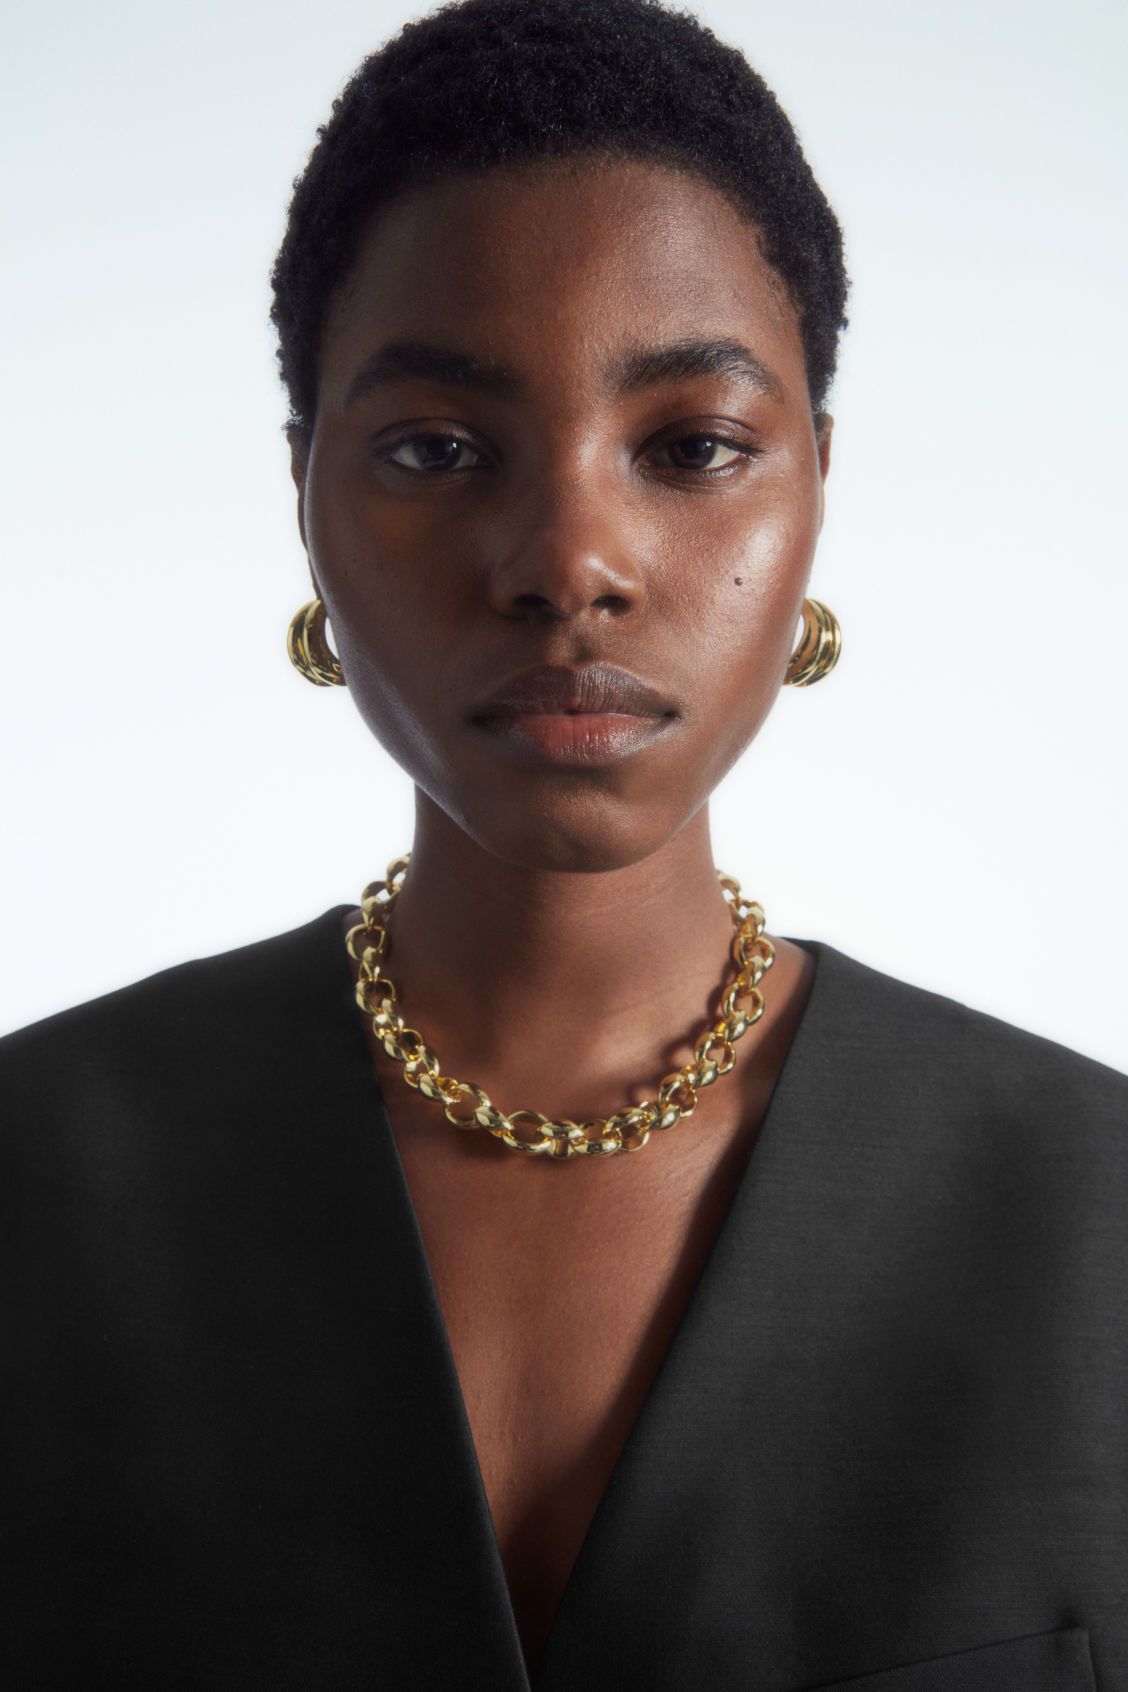 CHUNKY CHAIN NECKLACE | COS UK